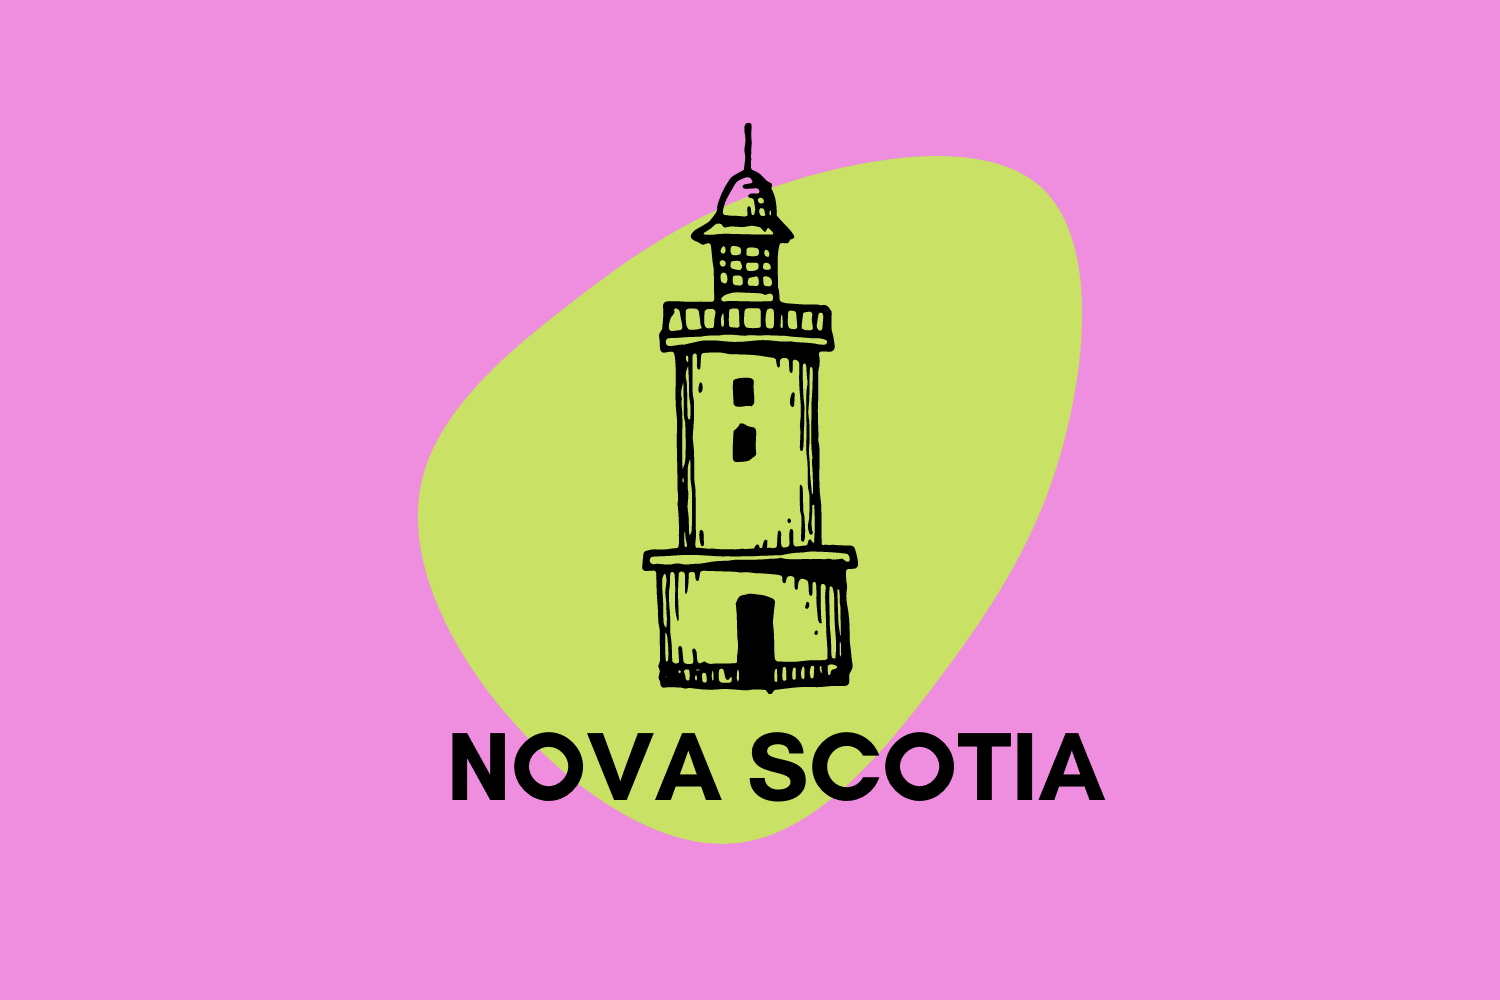 are-psychedelics-legal-in-nova-scotia-canada-here-s-what-the-law-says